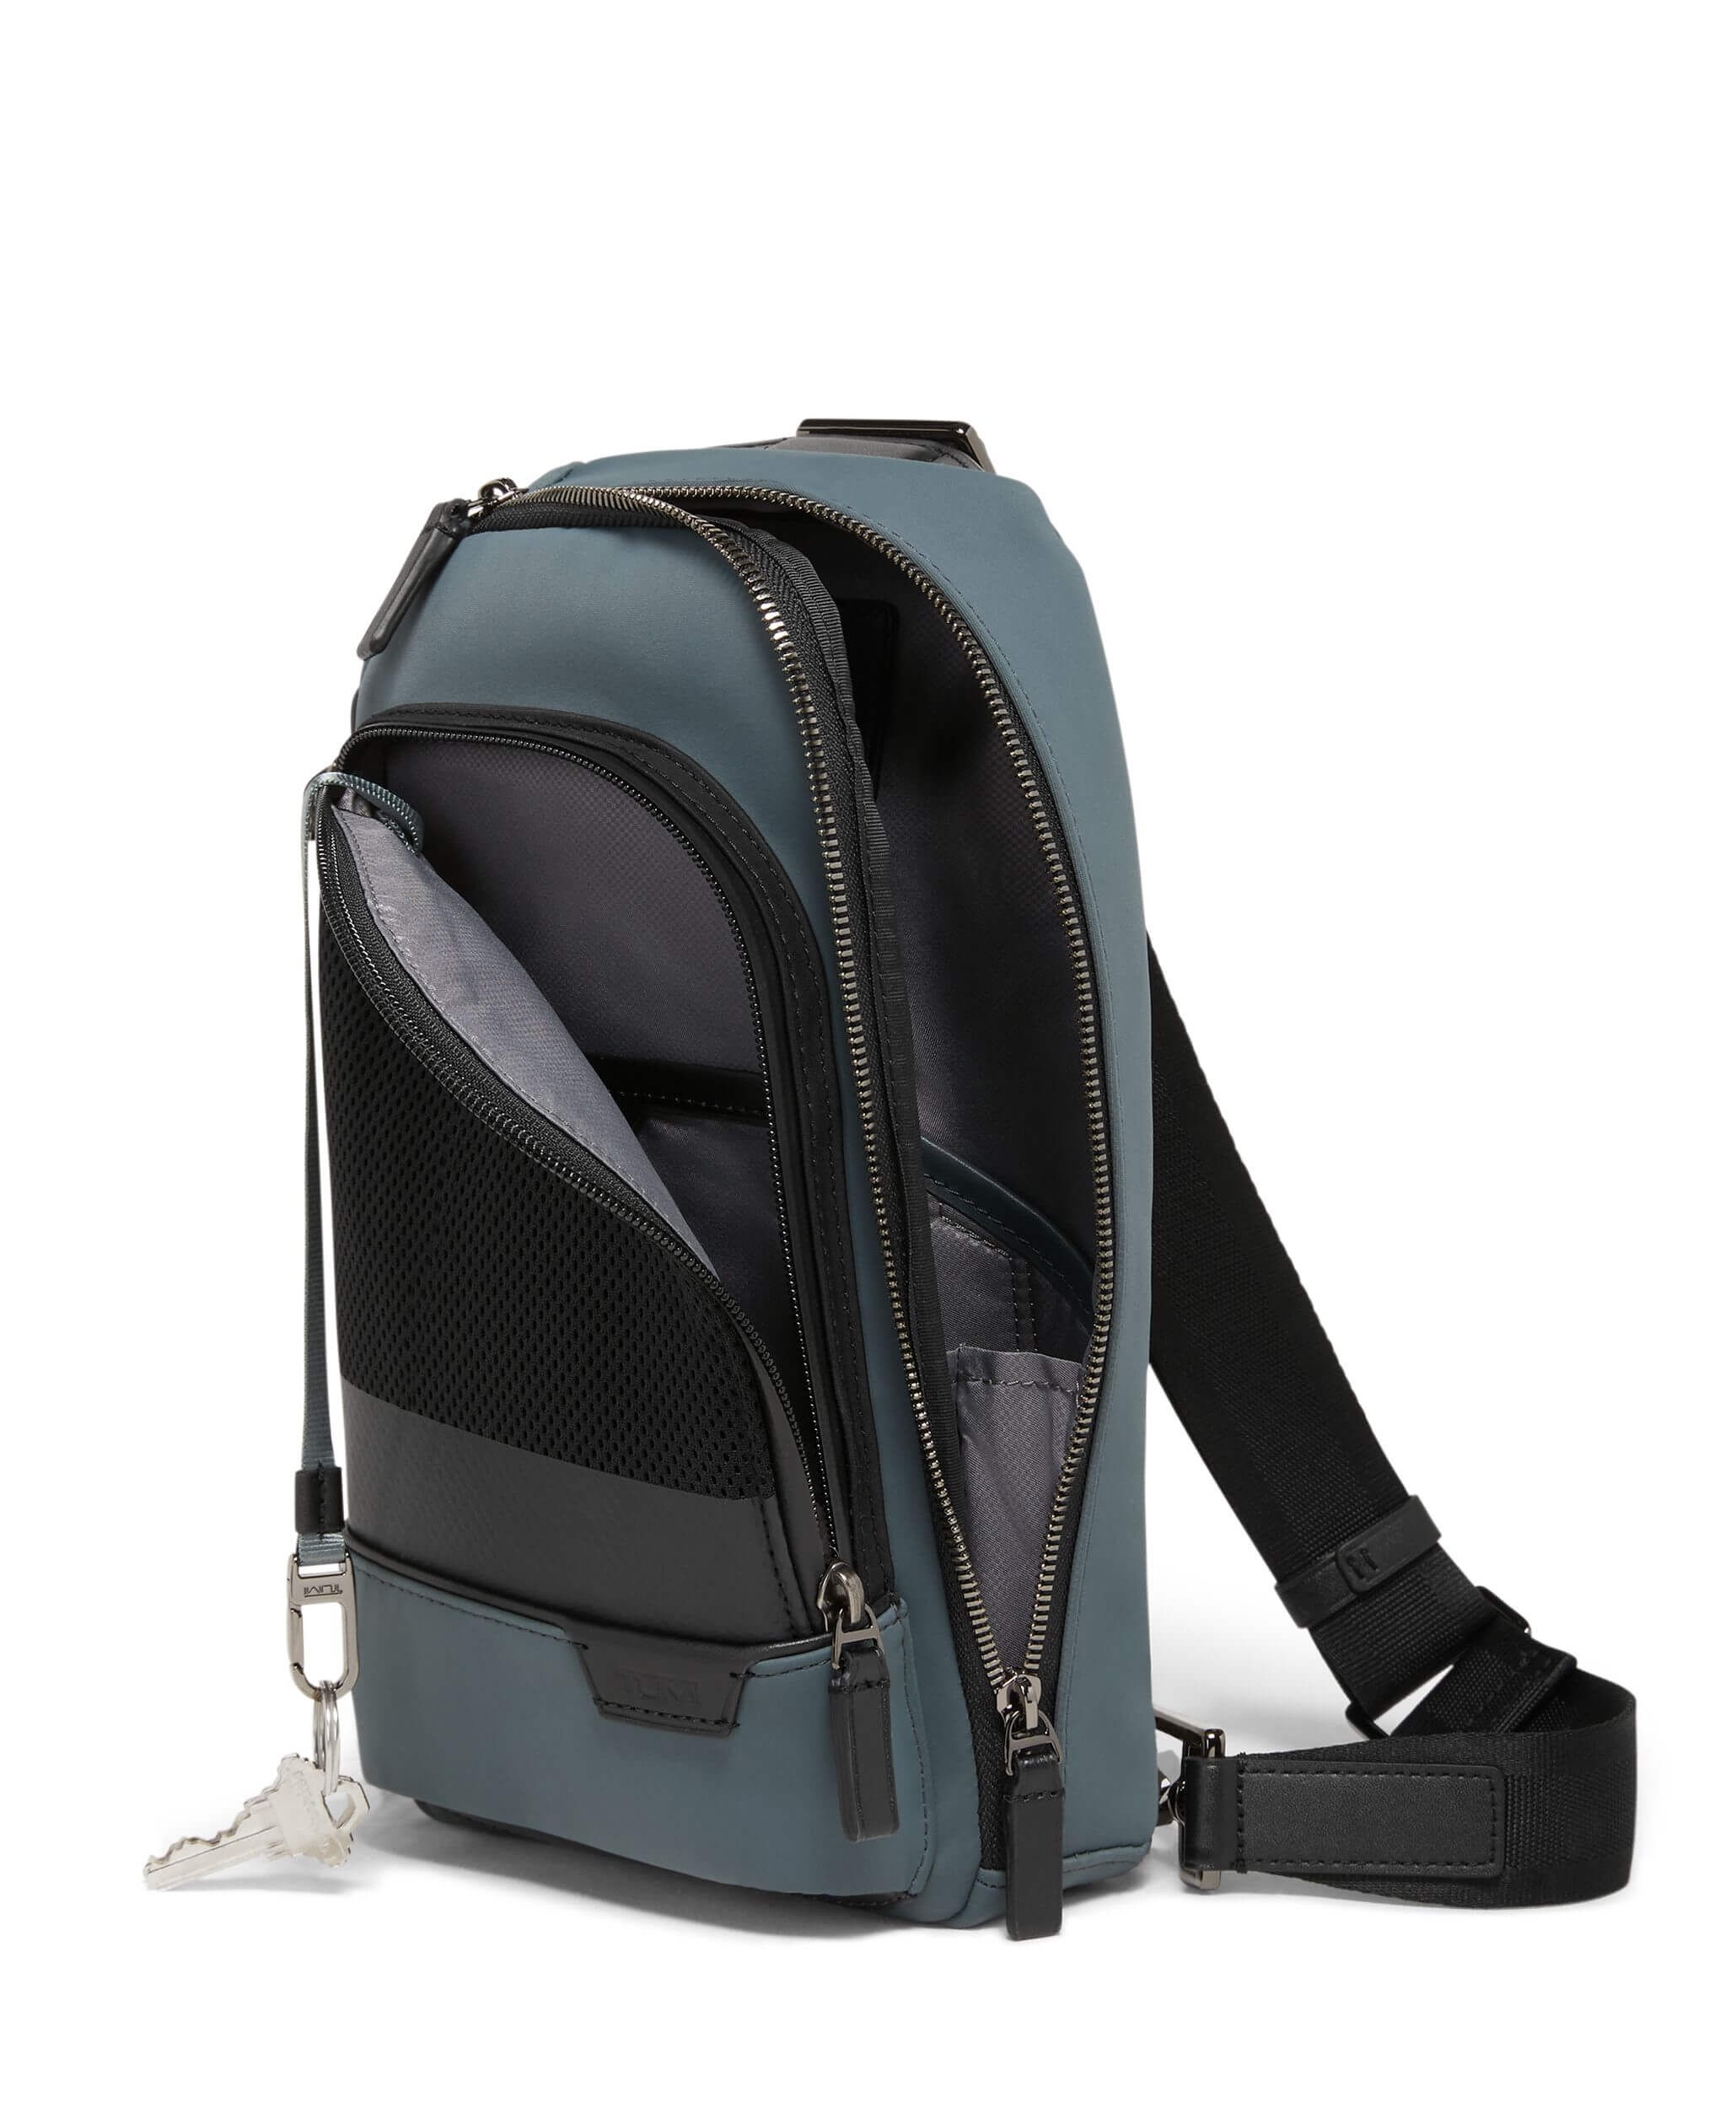 Harrison Gregory Sling | TUMI Luxembourg